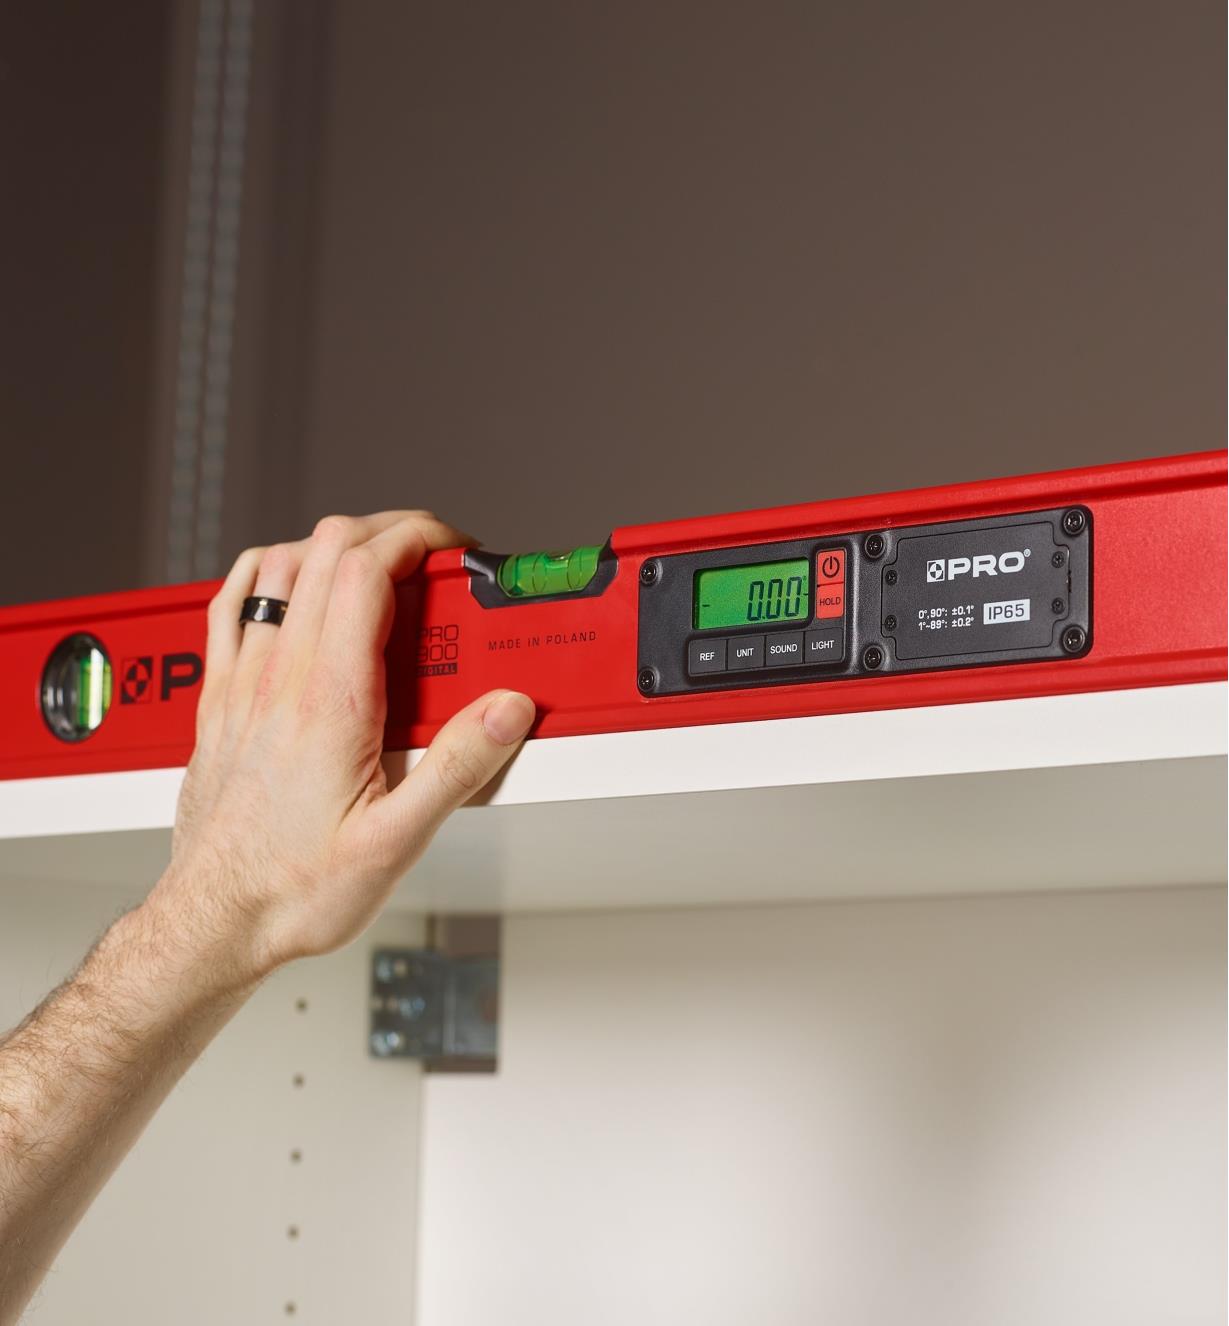 Using a digital level's audio signal to check a high shelf where the LCD would be hard to read